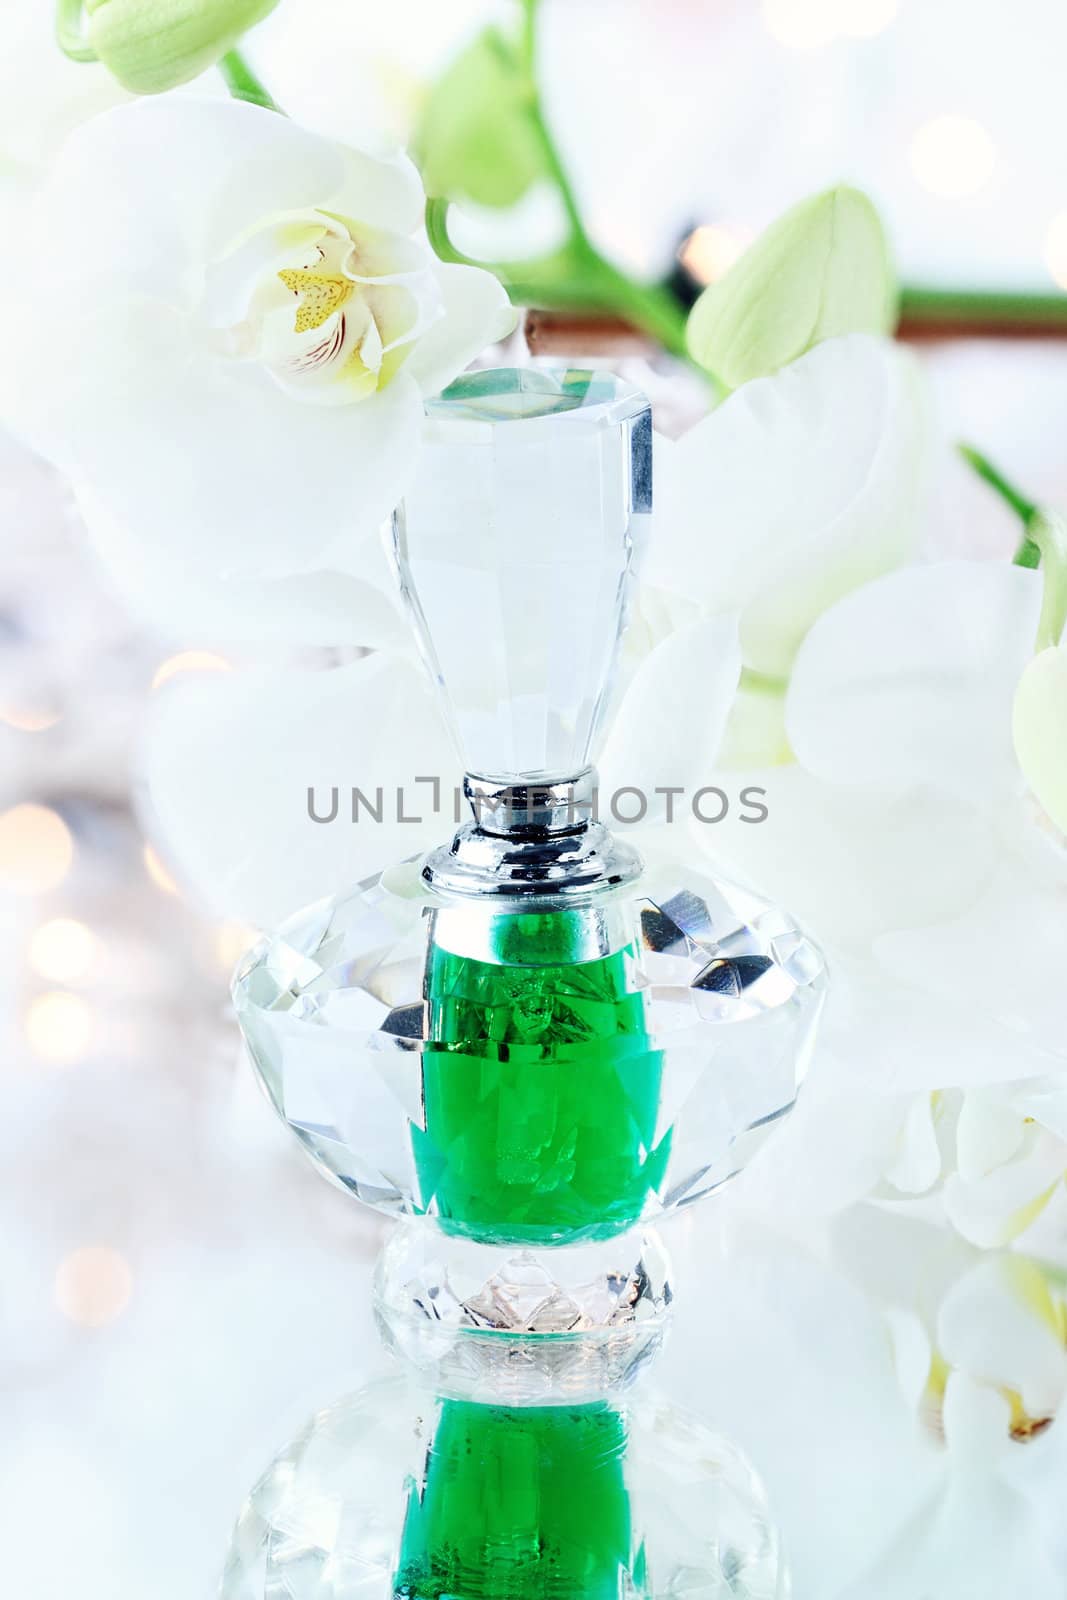 Beautiful bottle of perfume or essence with lovely white orchids.